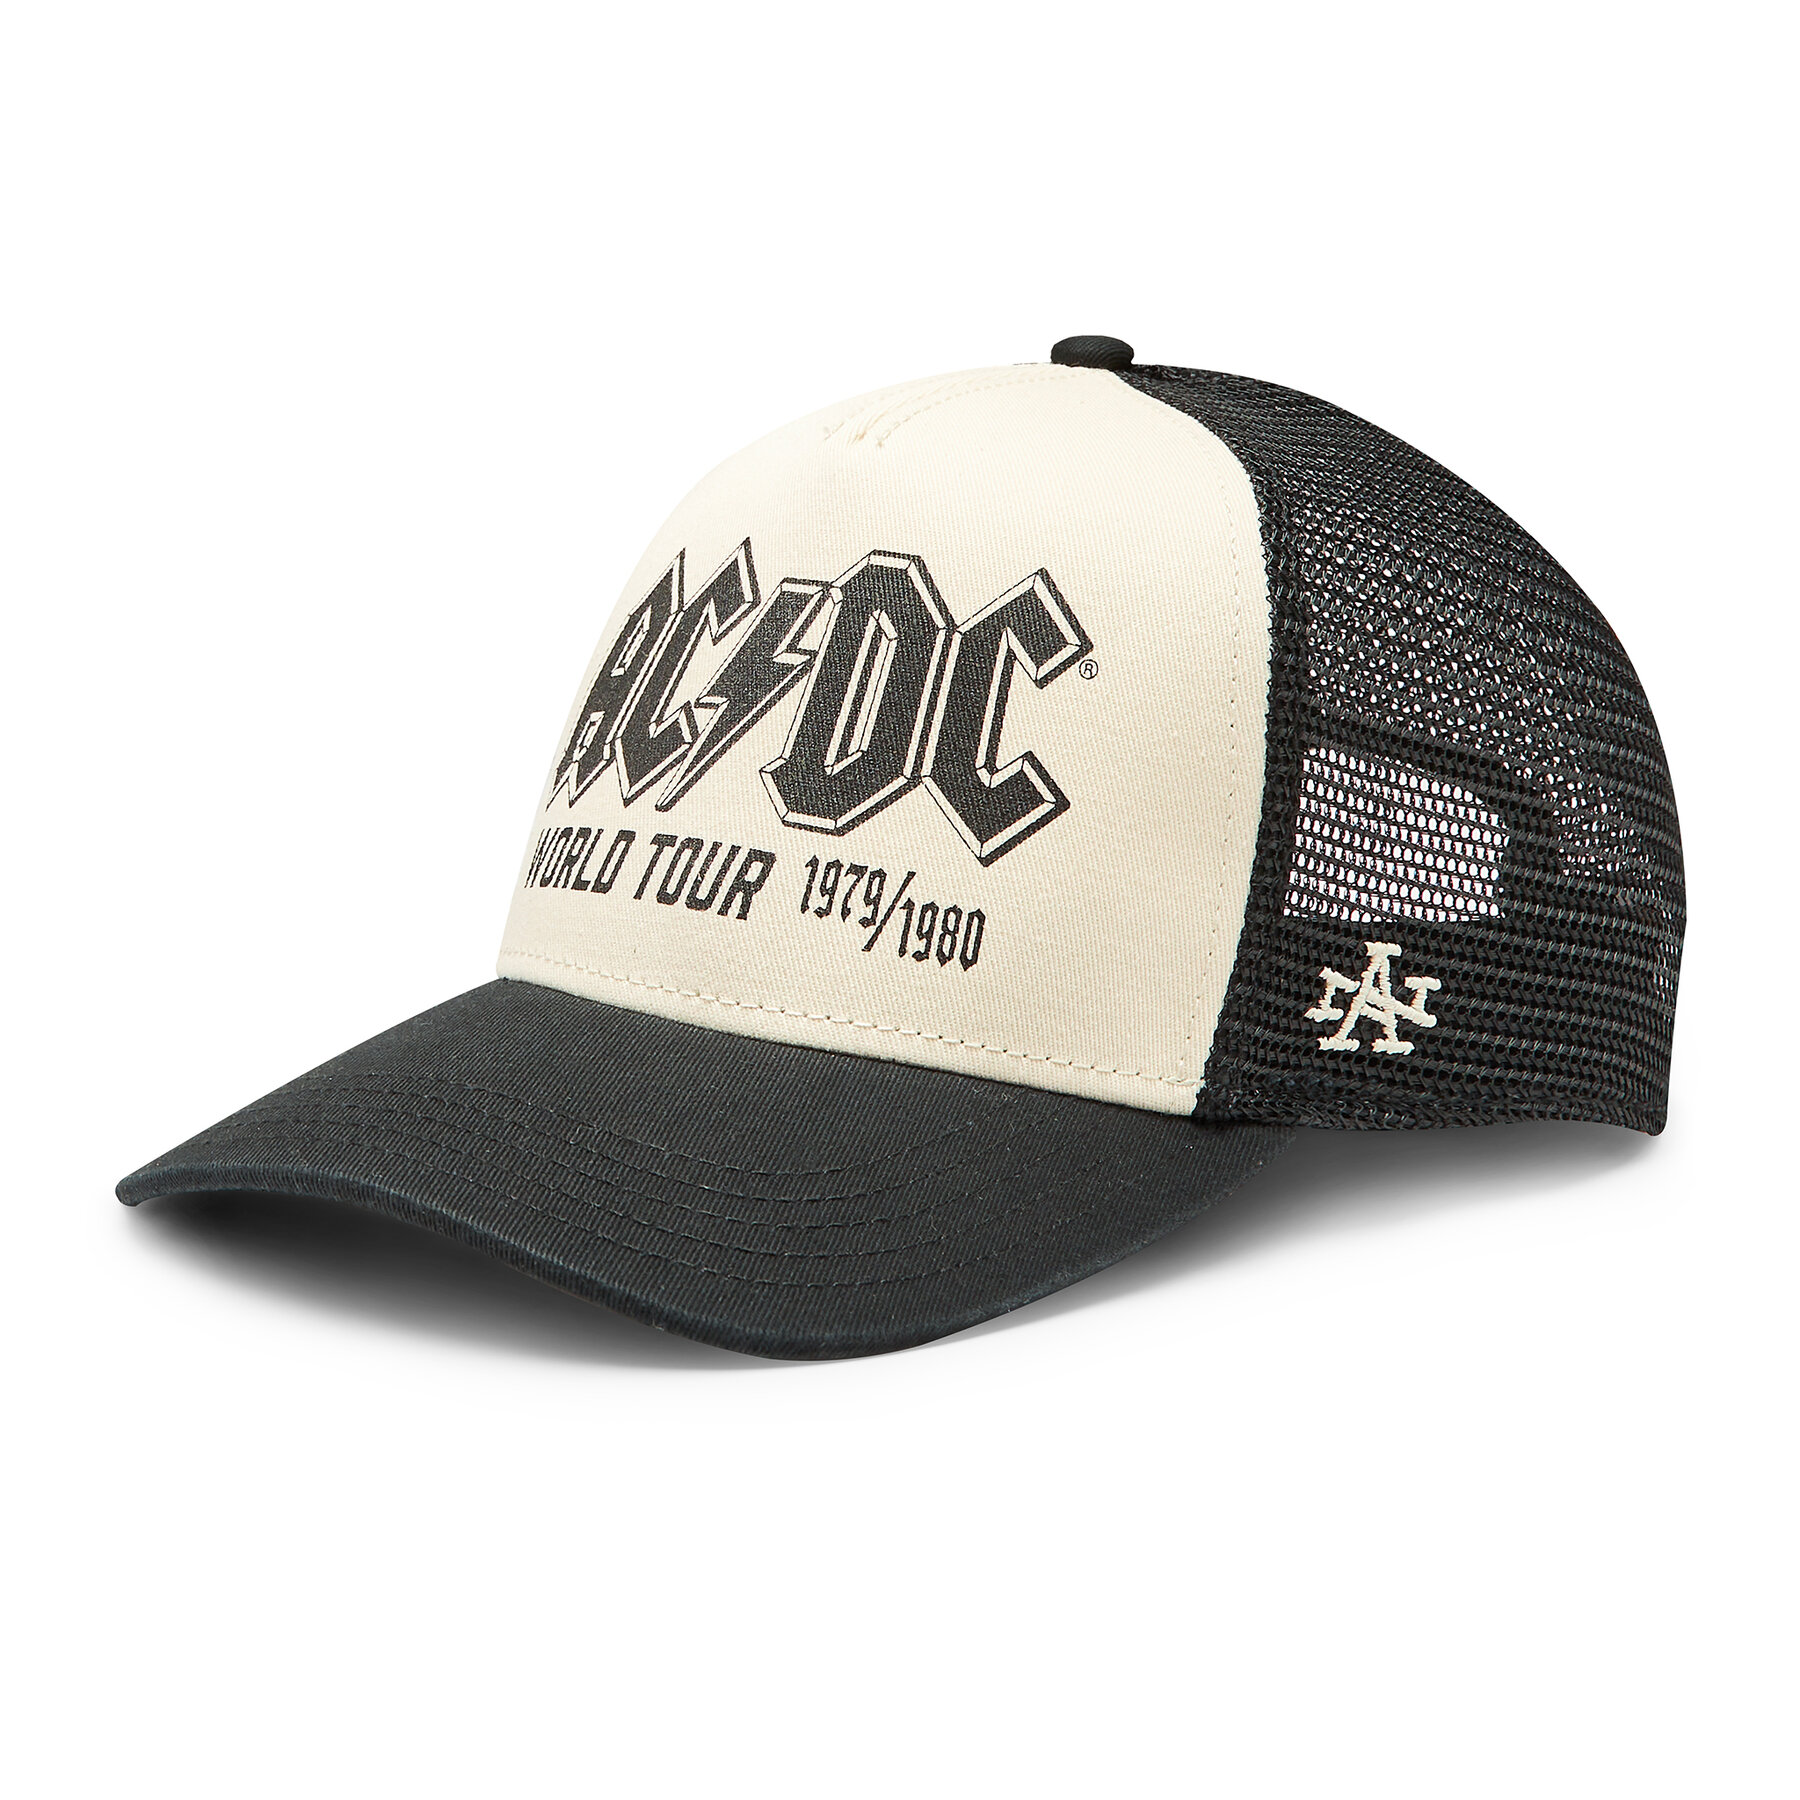 Šilterica American Needle Sinclair - ACDC SMU730A-ACDC Black/Ivory